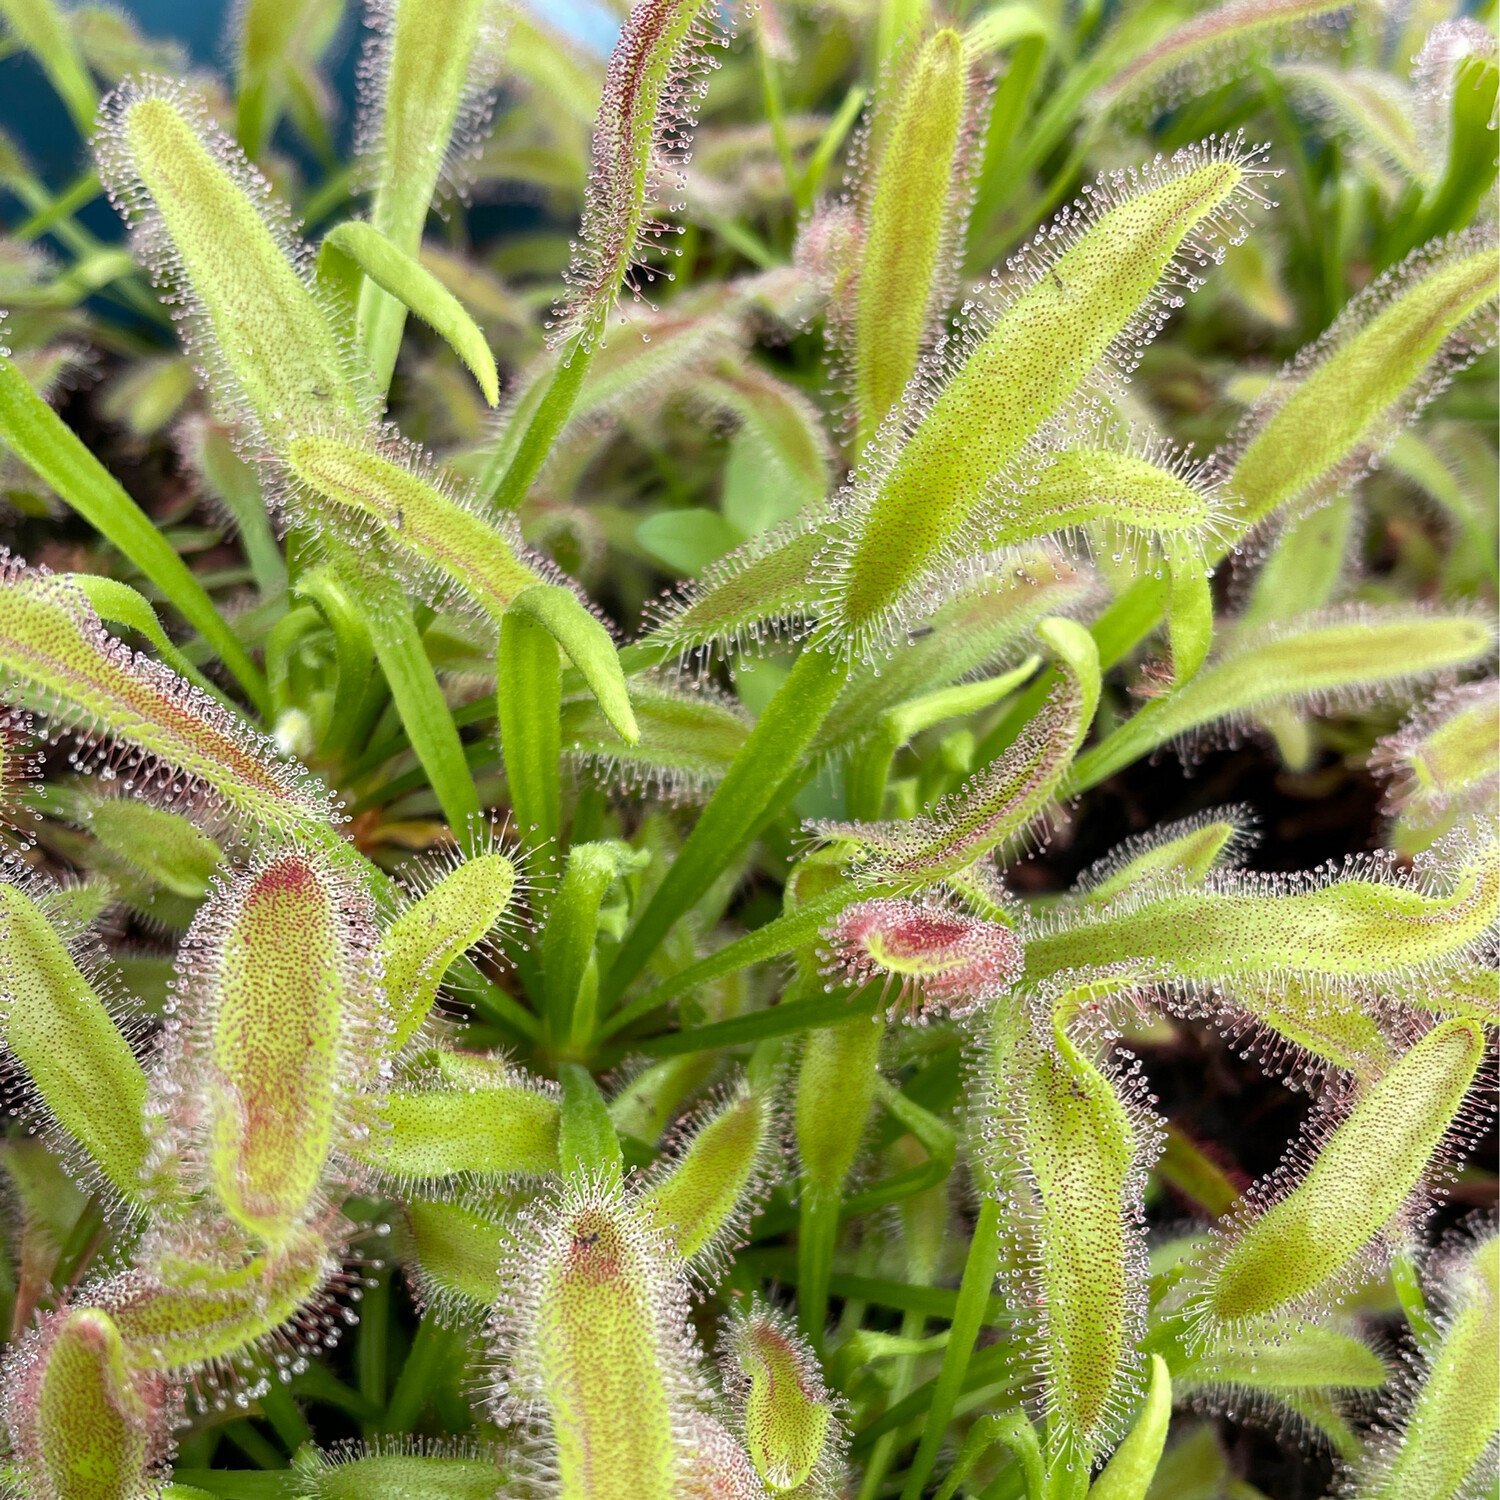 Drosera capensis "Wide-Leaf" Cape Sundew -Buy one get one 1/2 price! 